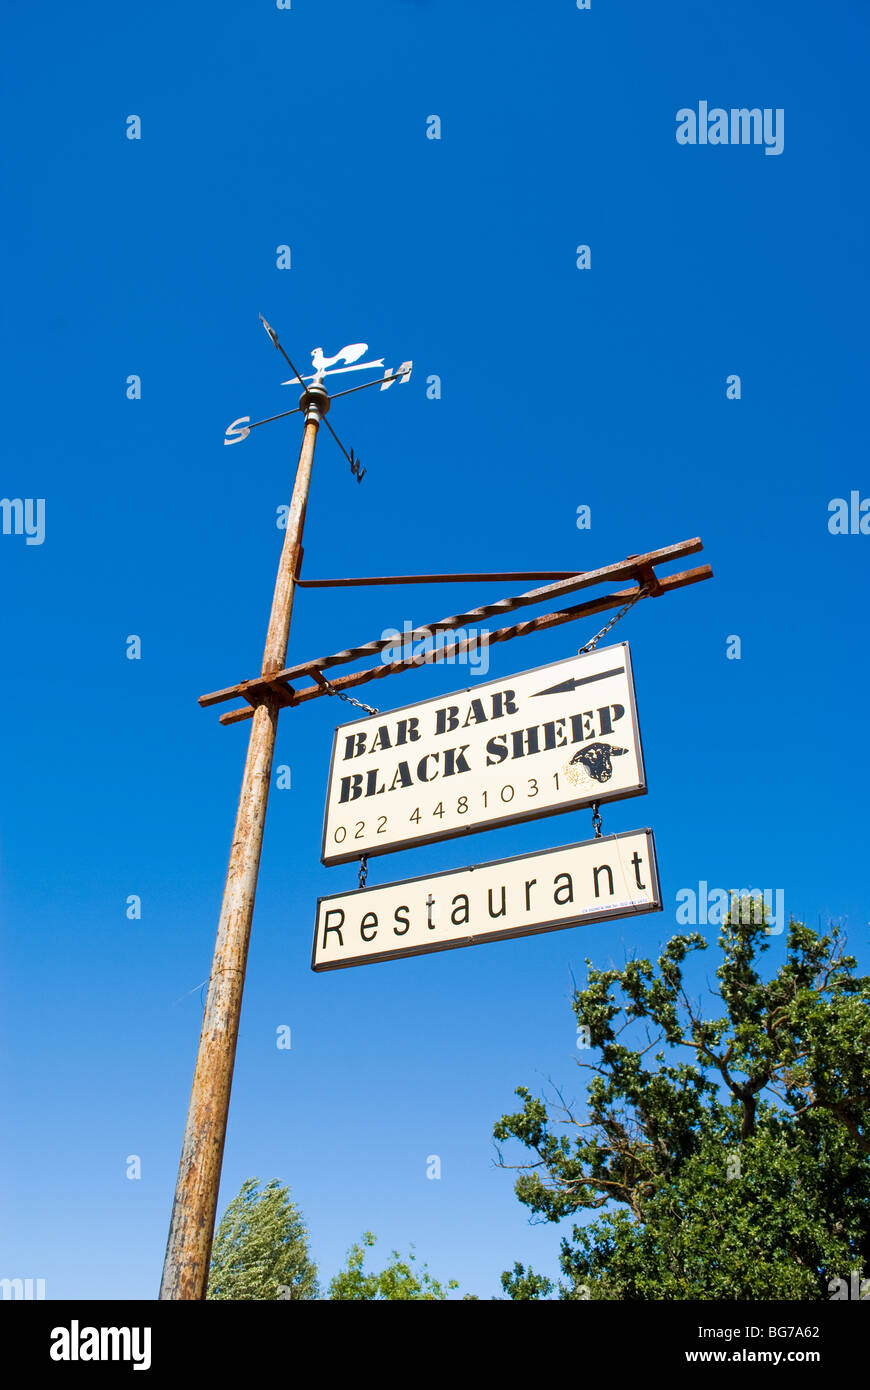 A sign for Bar Bar Black Sheep restaurant in the village of Riebeek Kasteel, Western Cape, South Africa. Stock Photo